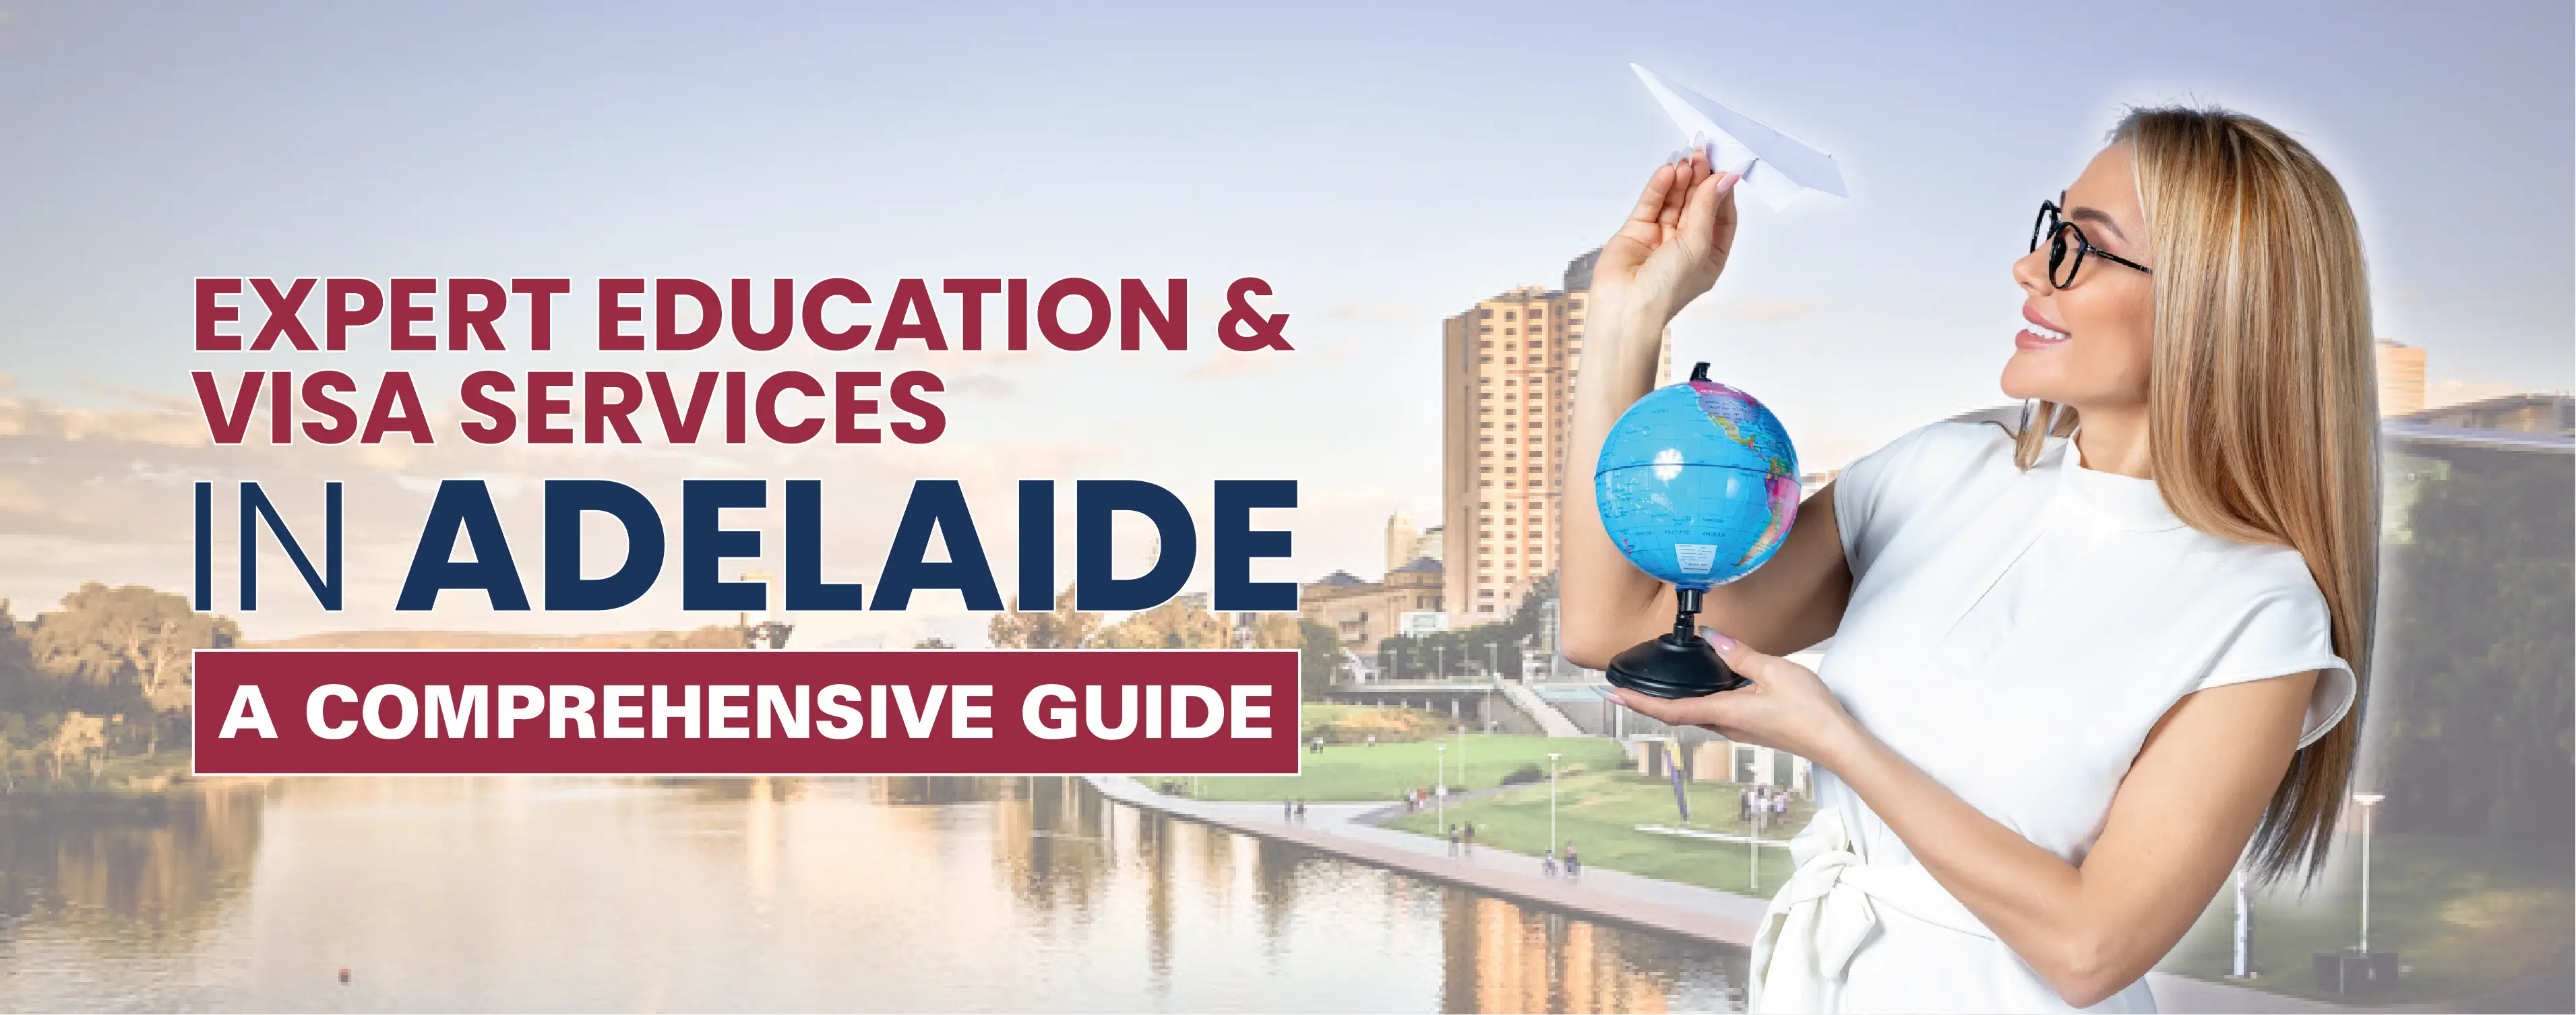 Expert Education and Visa Services in Adelaide